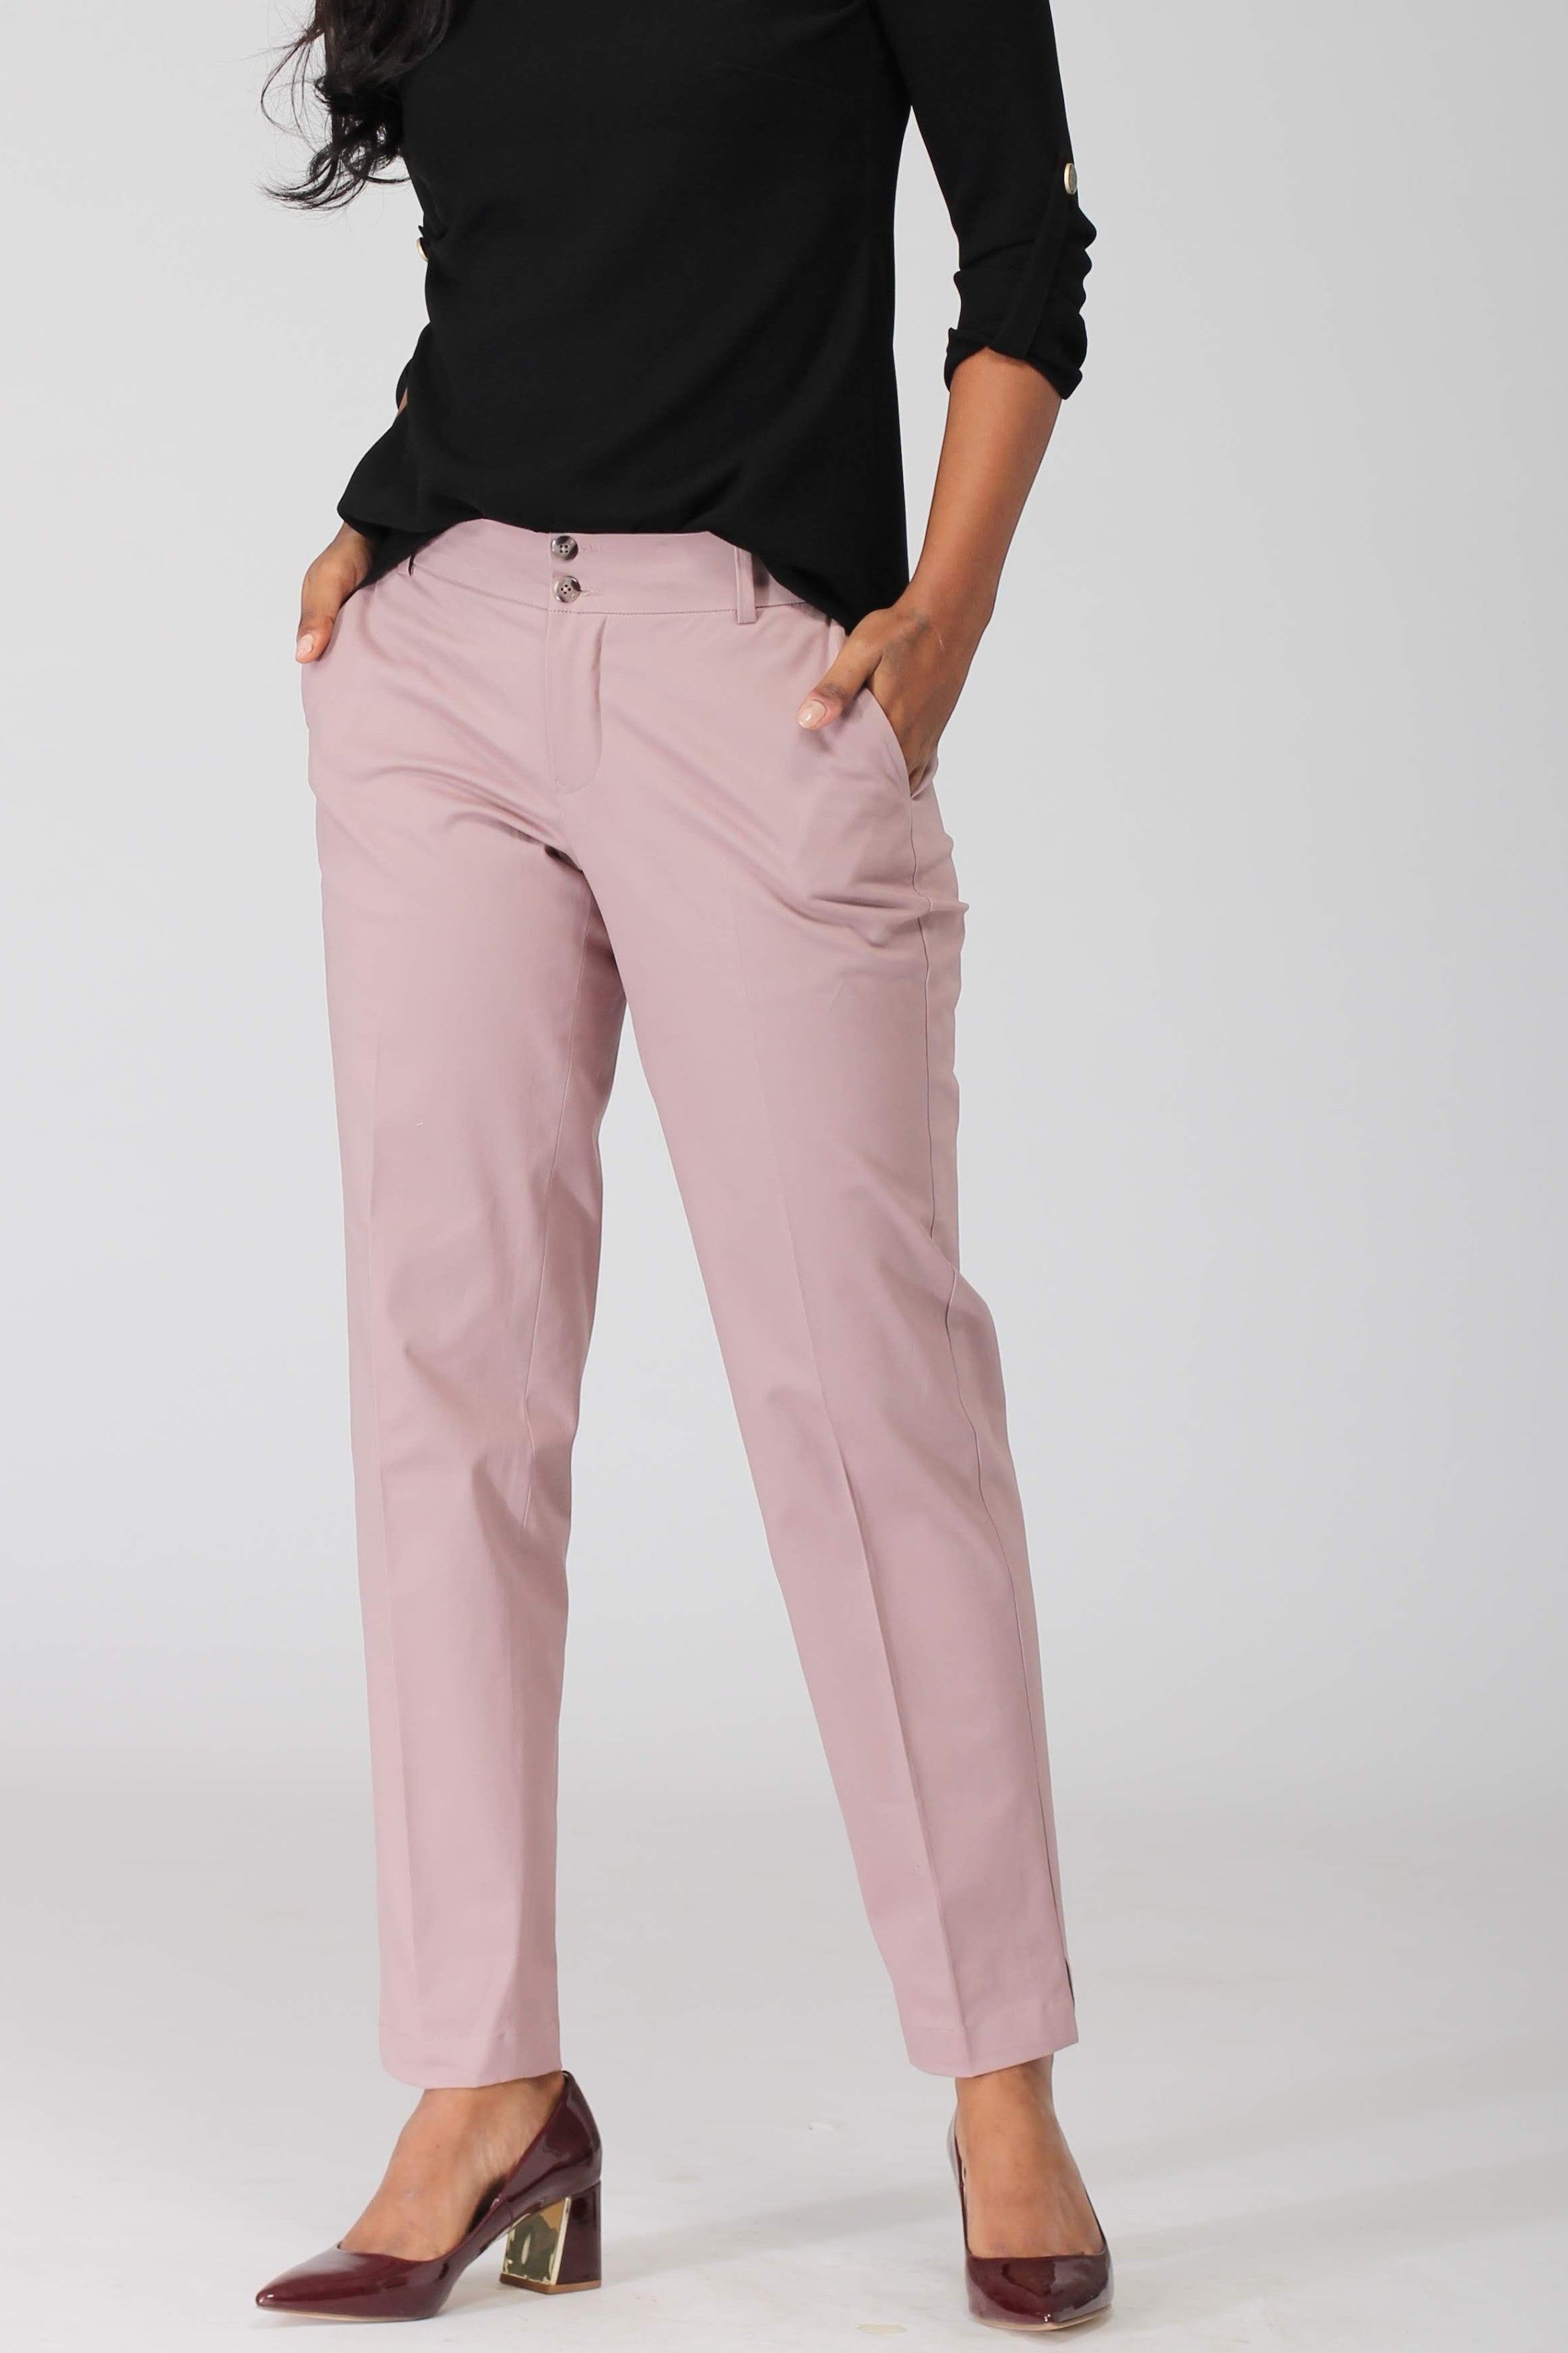 Go Colors Women Dark Solid Polyester Mid Rise Shiny Pants  Pink Buy Go  Colors Women Dark Solid Polyester Mid Rise Shiny Pants  Pink Online at  Best Price in India  Nykaa